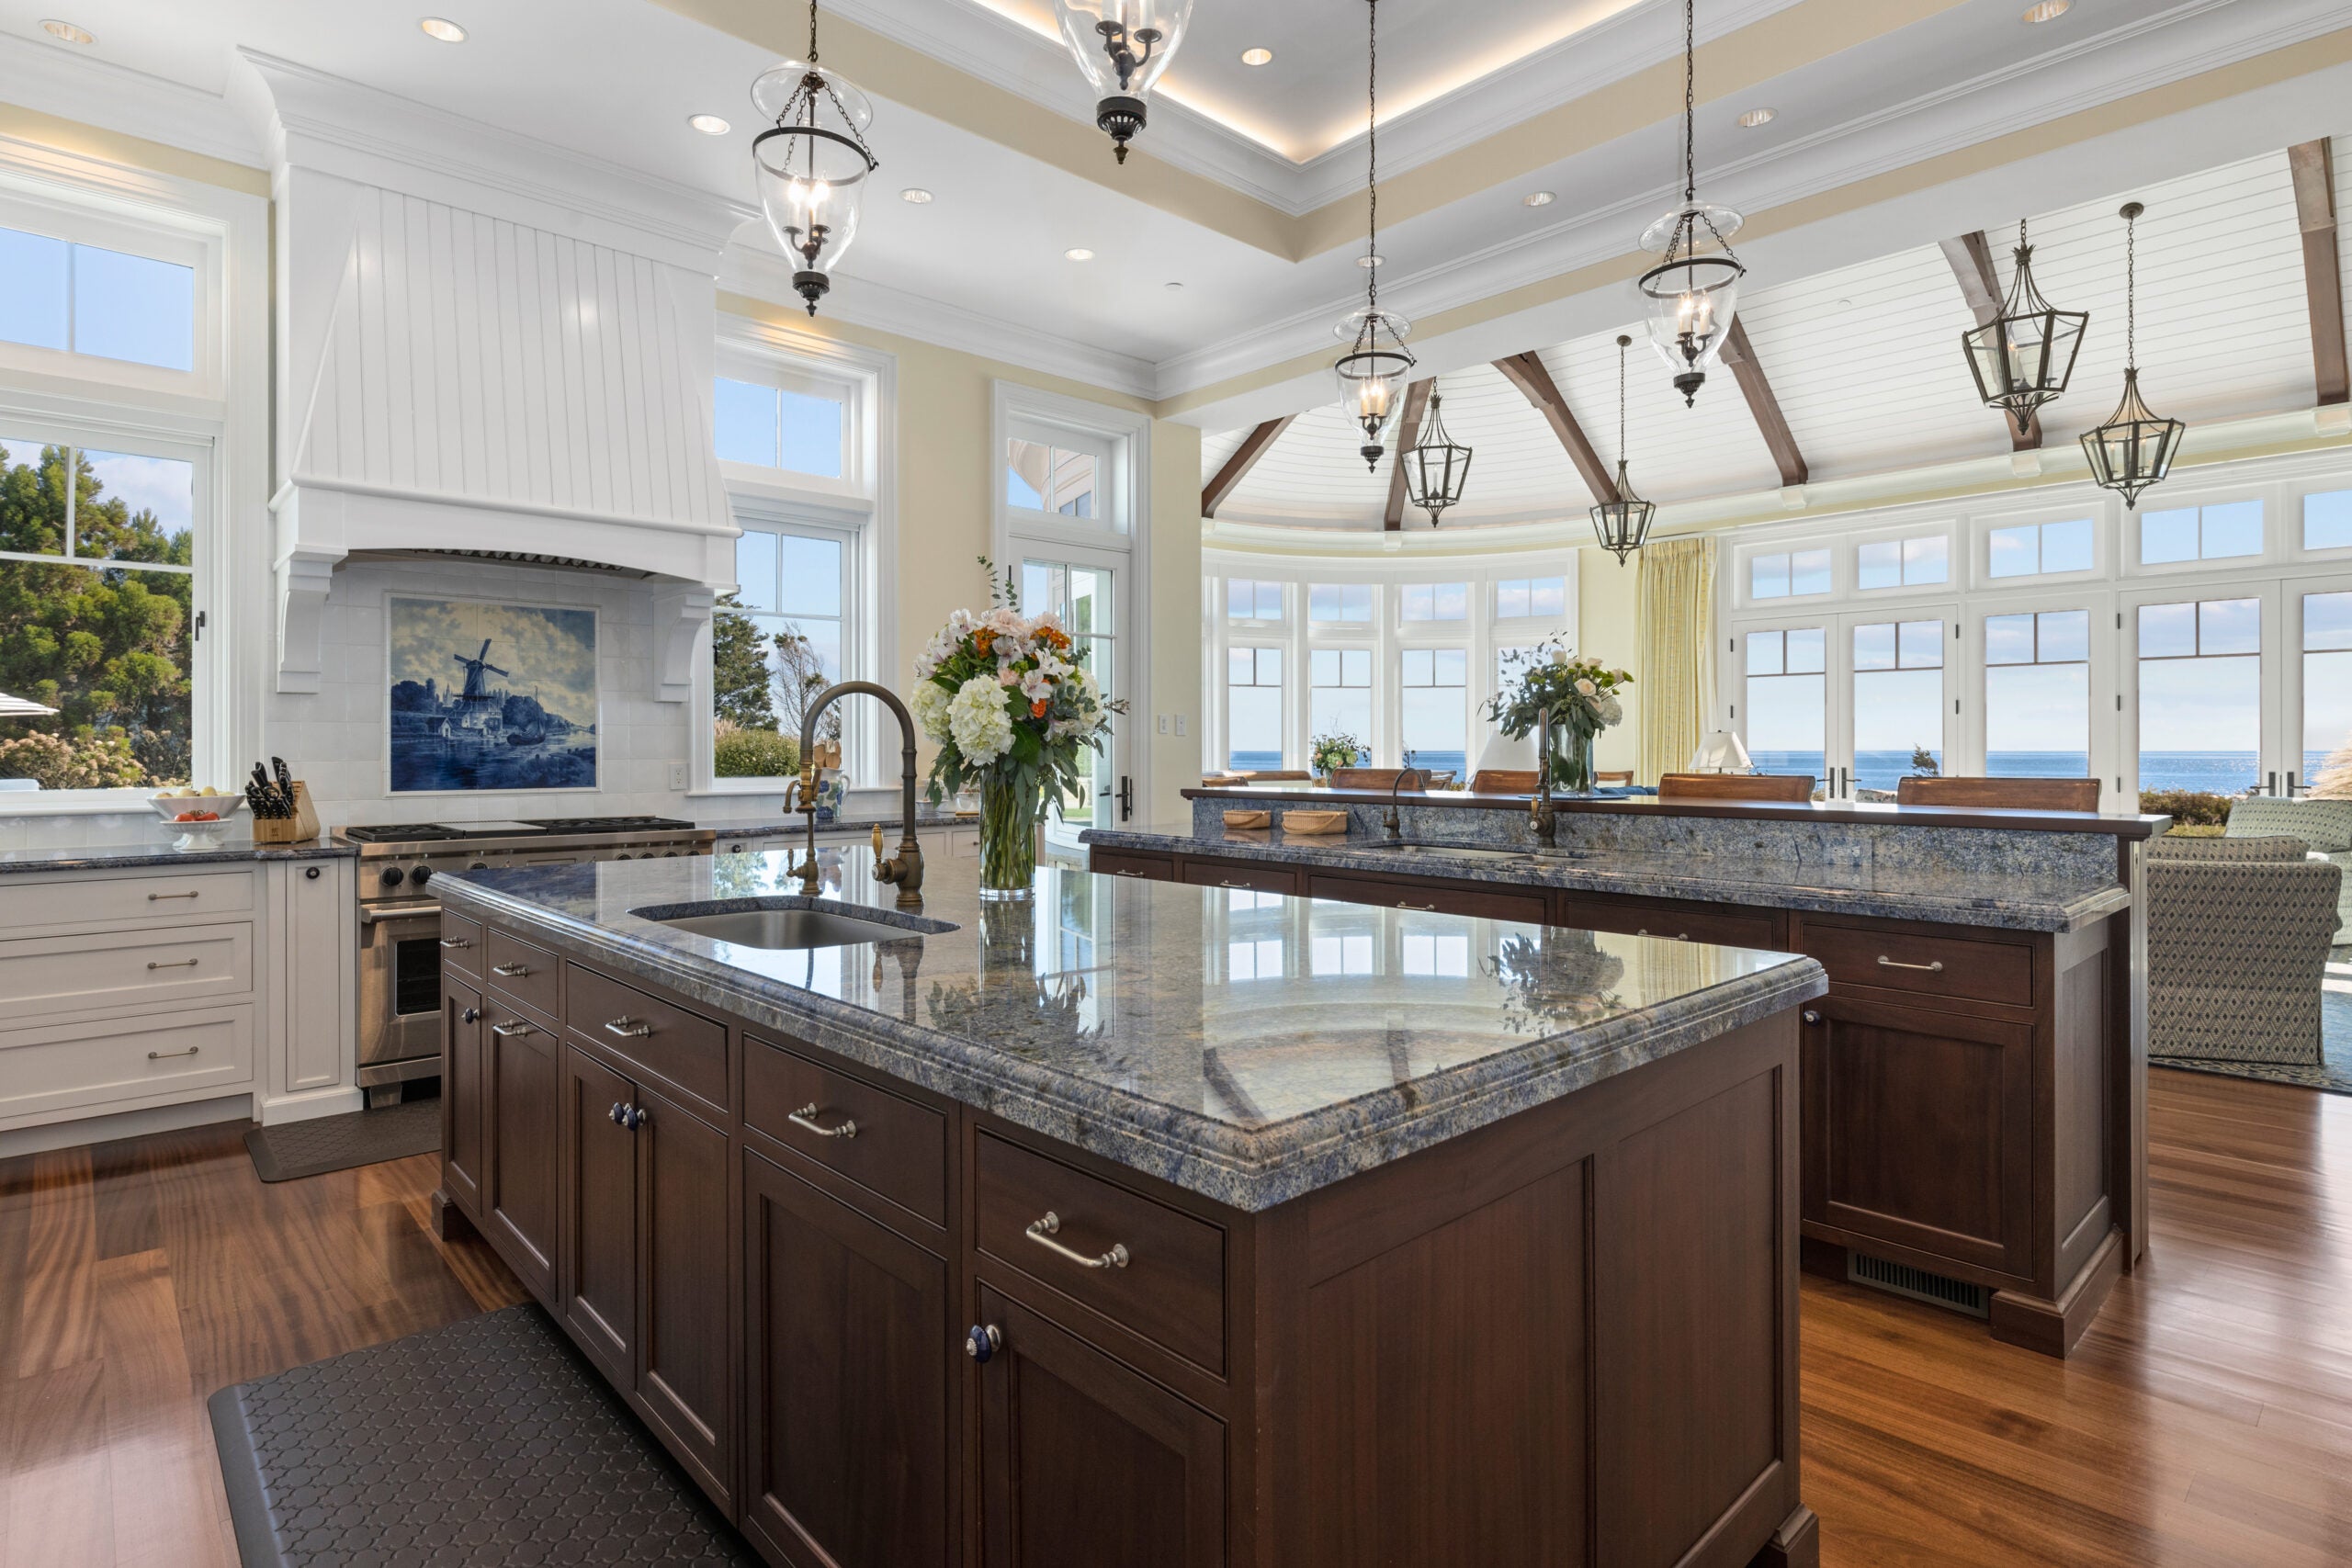 A look from within the kitchen. The two islands are the main focus. Both have sinks. In the background is the breakfast nook and the family room and beyond that the ocean.